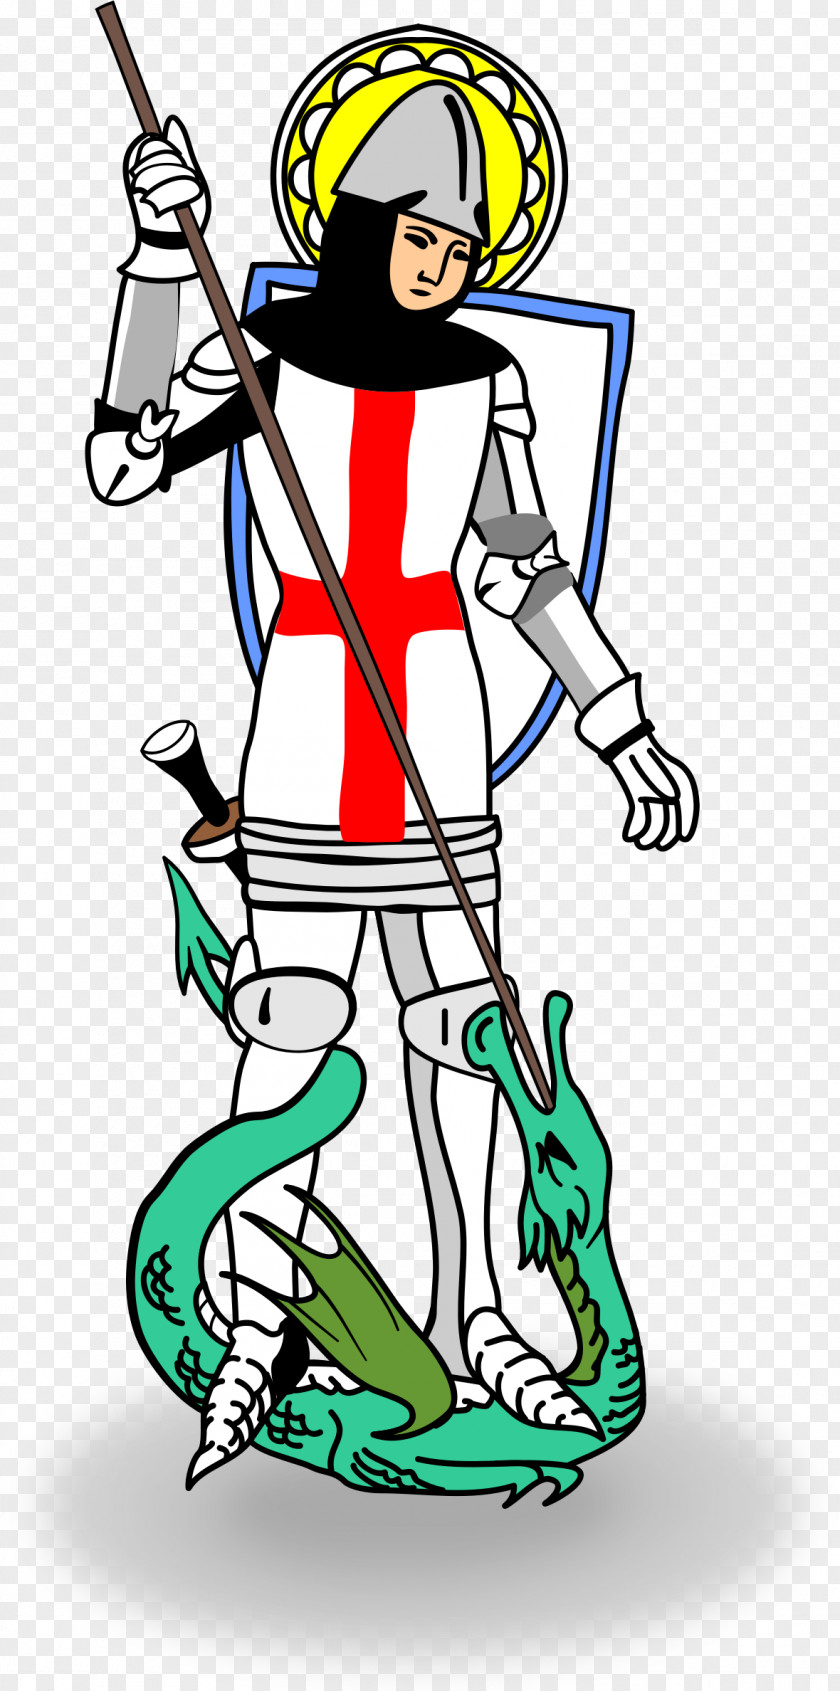 Saint George And The Dragon Clip Art PNG